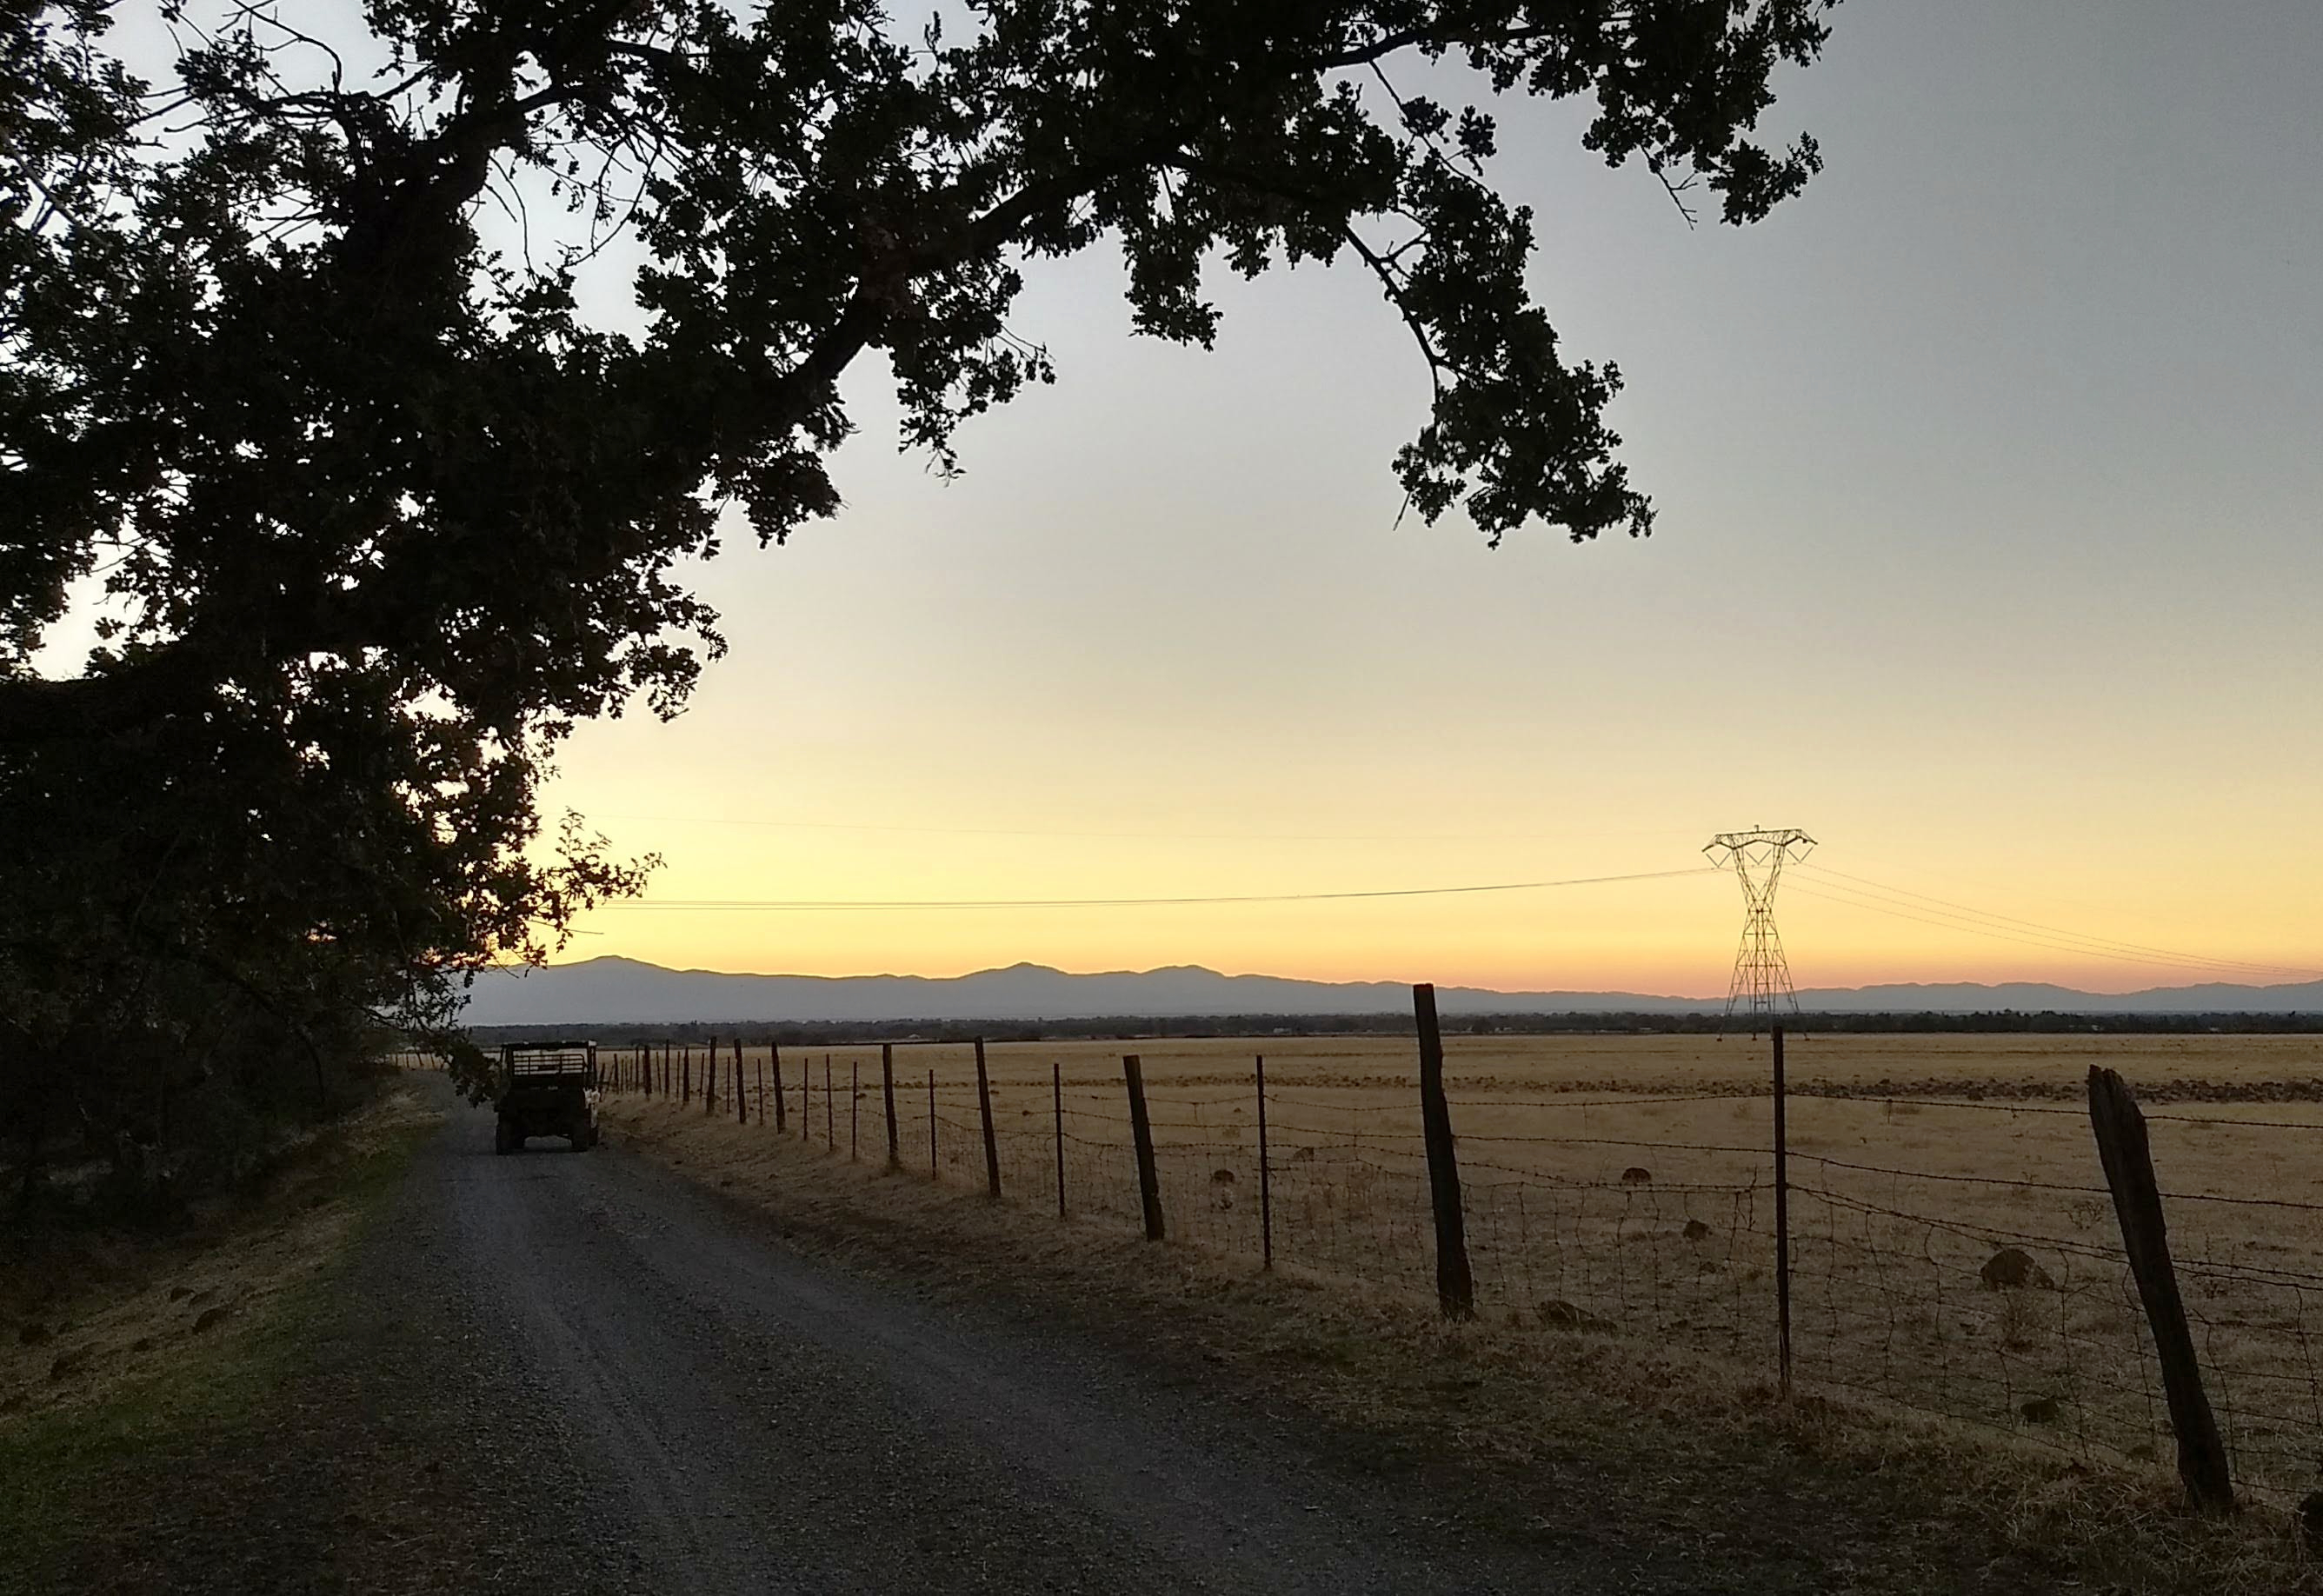 Sunset view of a ranch fence and overhanging tree.